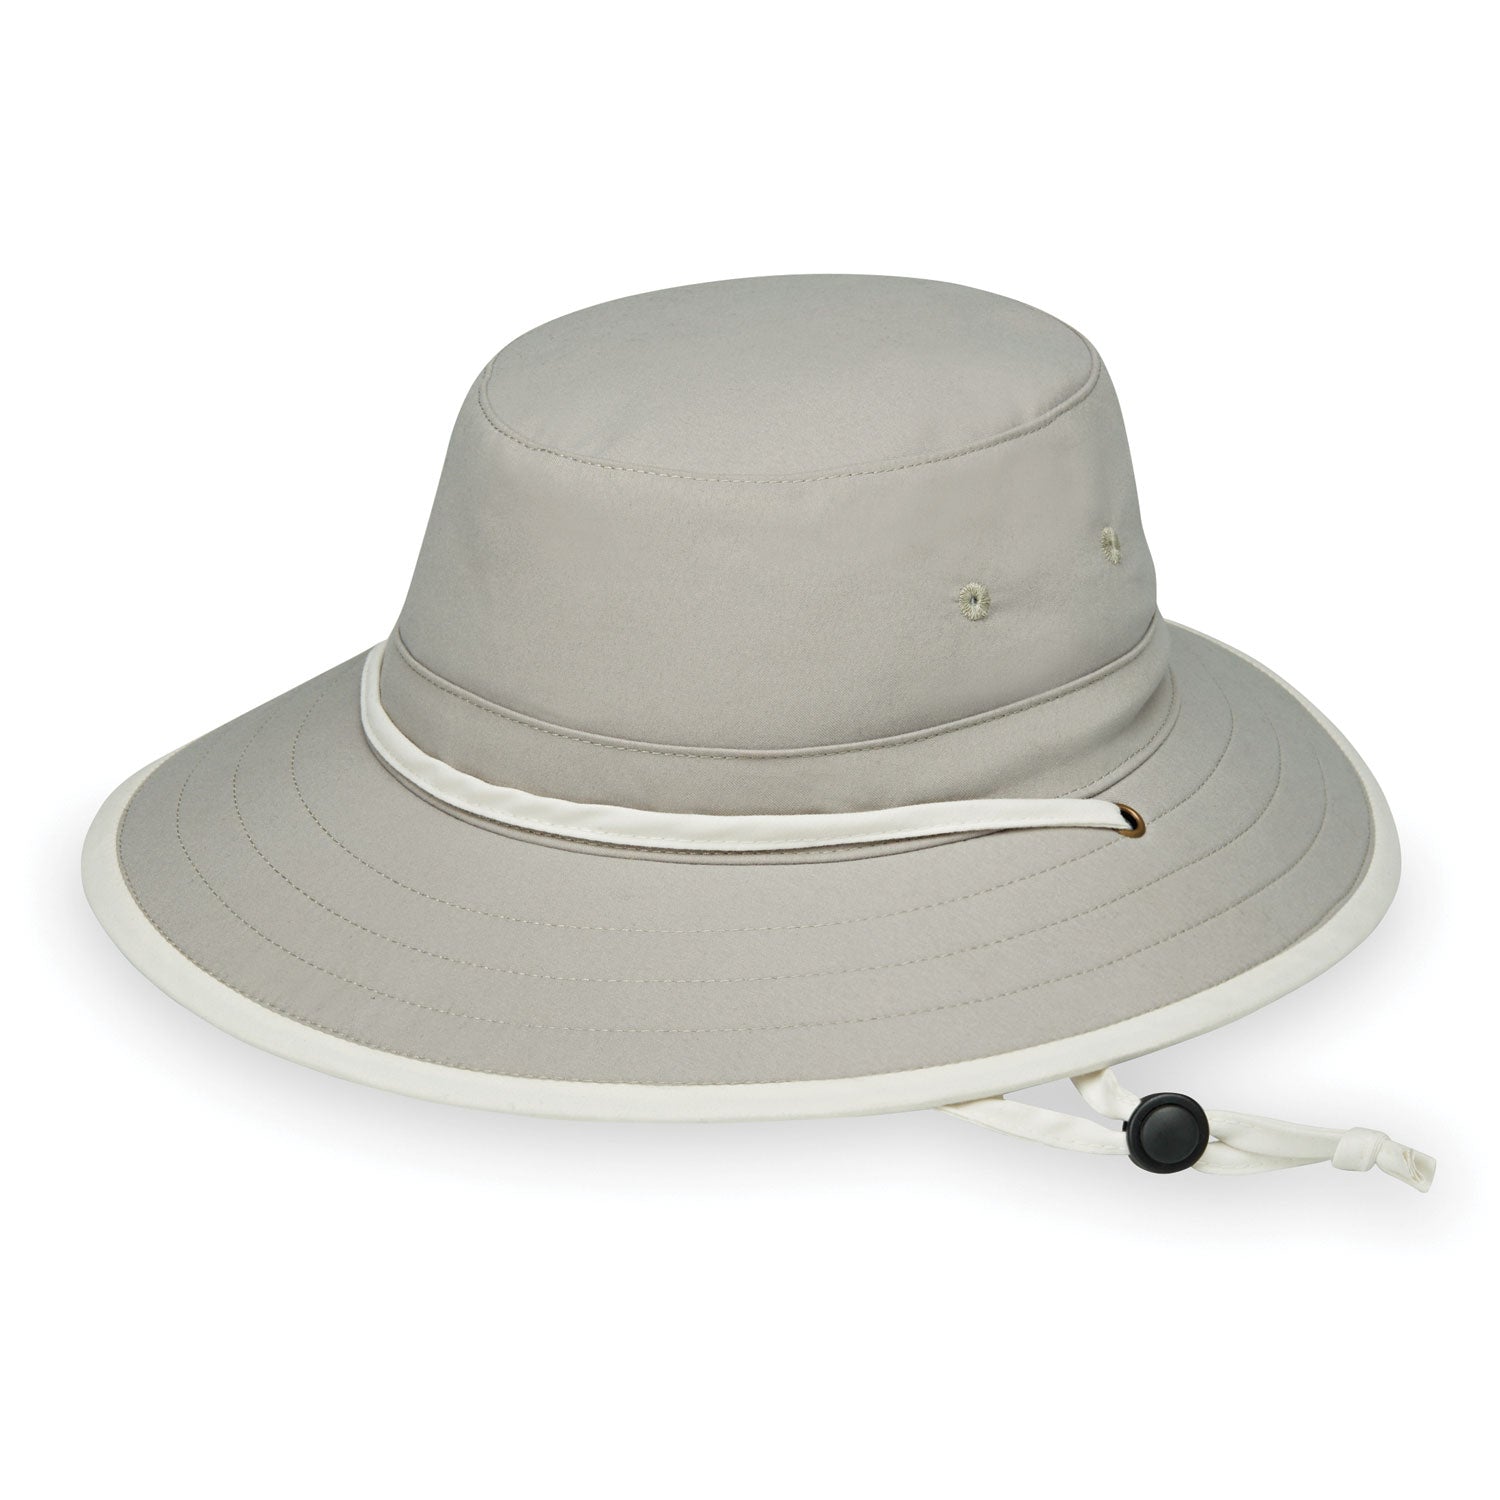 Featuring Women's Packable UPF Ladies' Explorer Summer Sun Hat with Chinstrap from Wallaroo